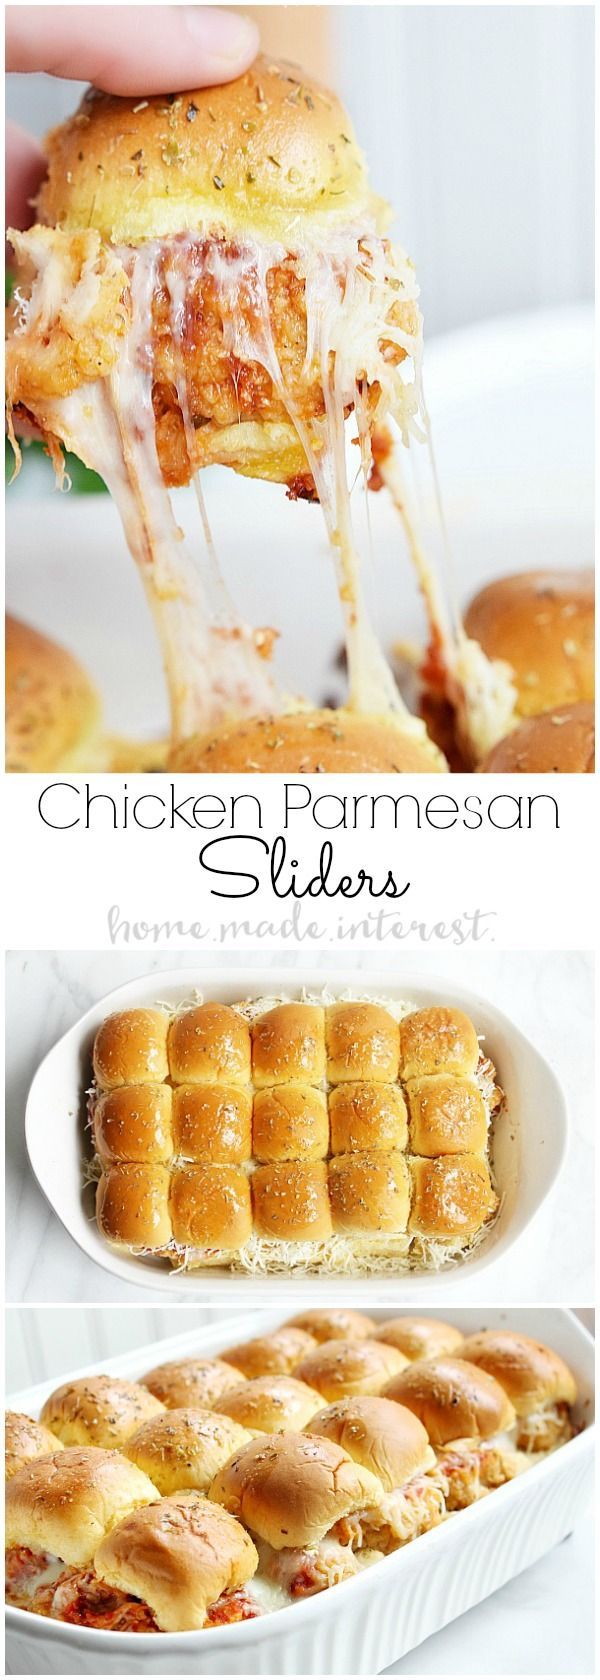 These Chicken Parmesan sliders are an easy recipe that everyone is going to love. Fried chicken tender